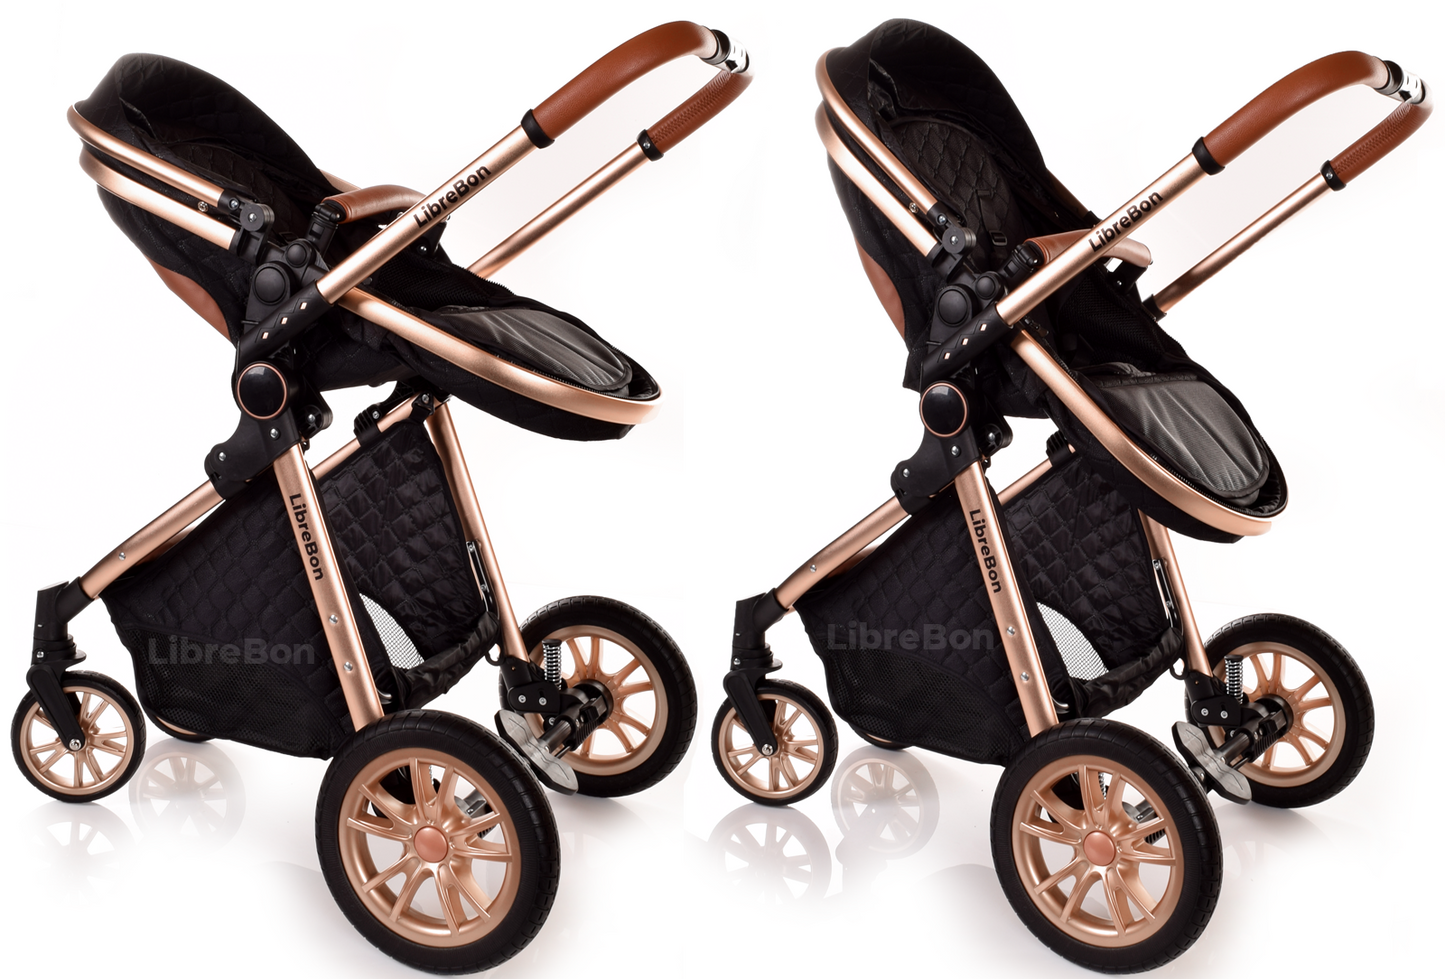 Baby Pram Buggy Travel System With Car Seat Black